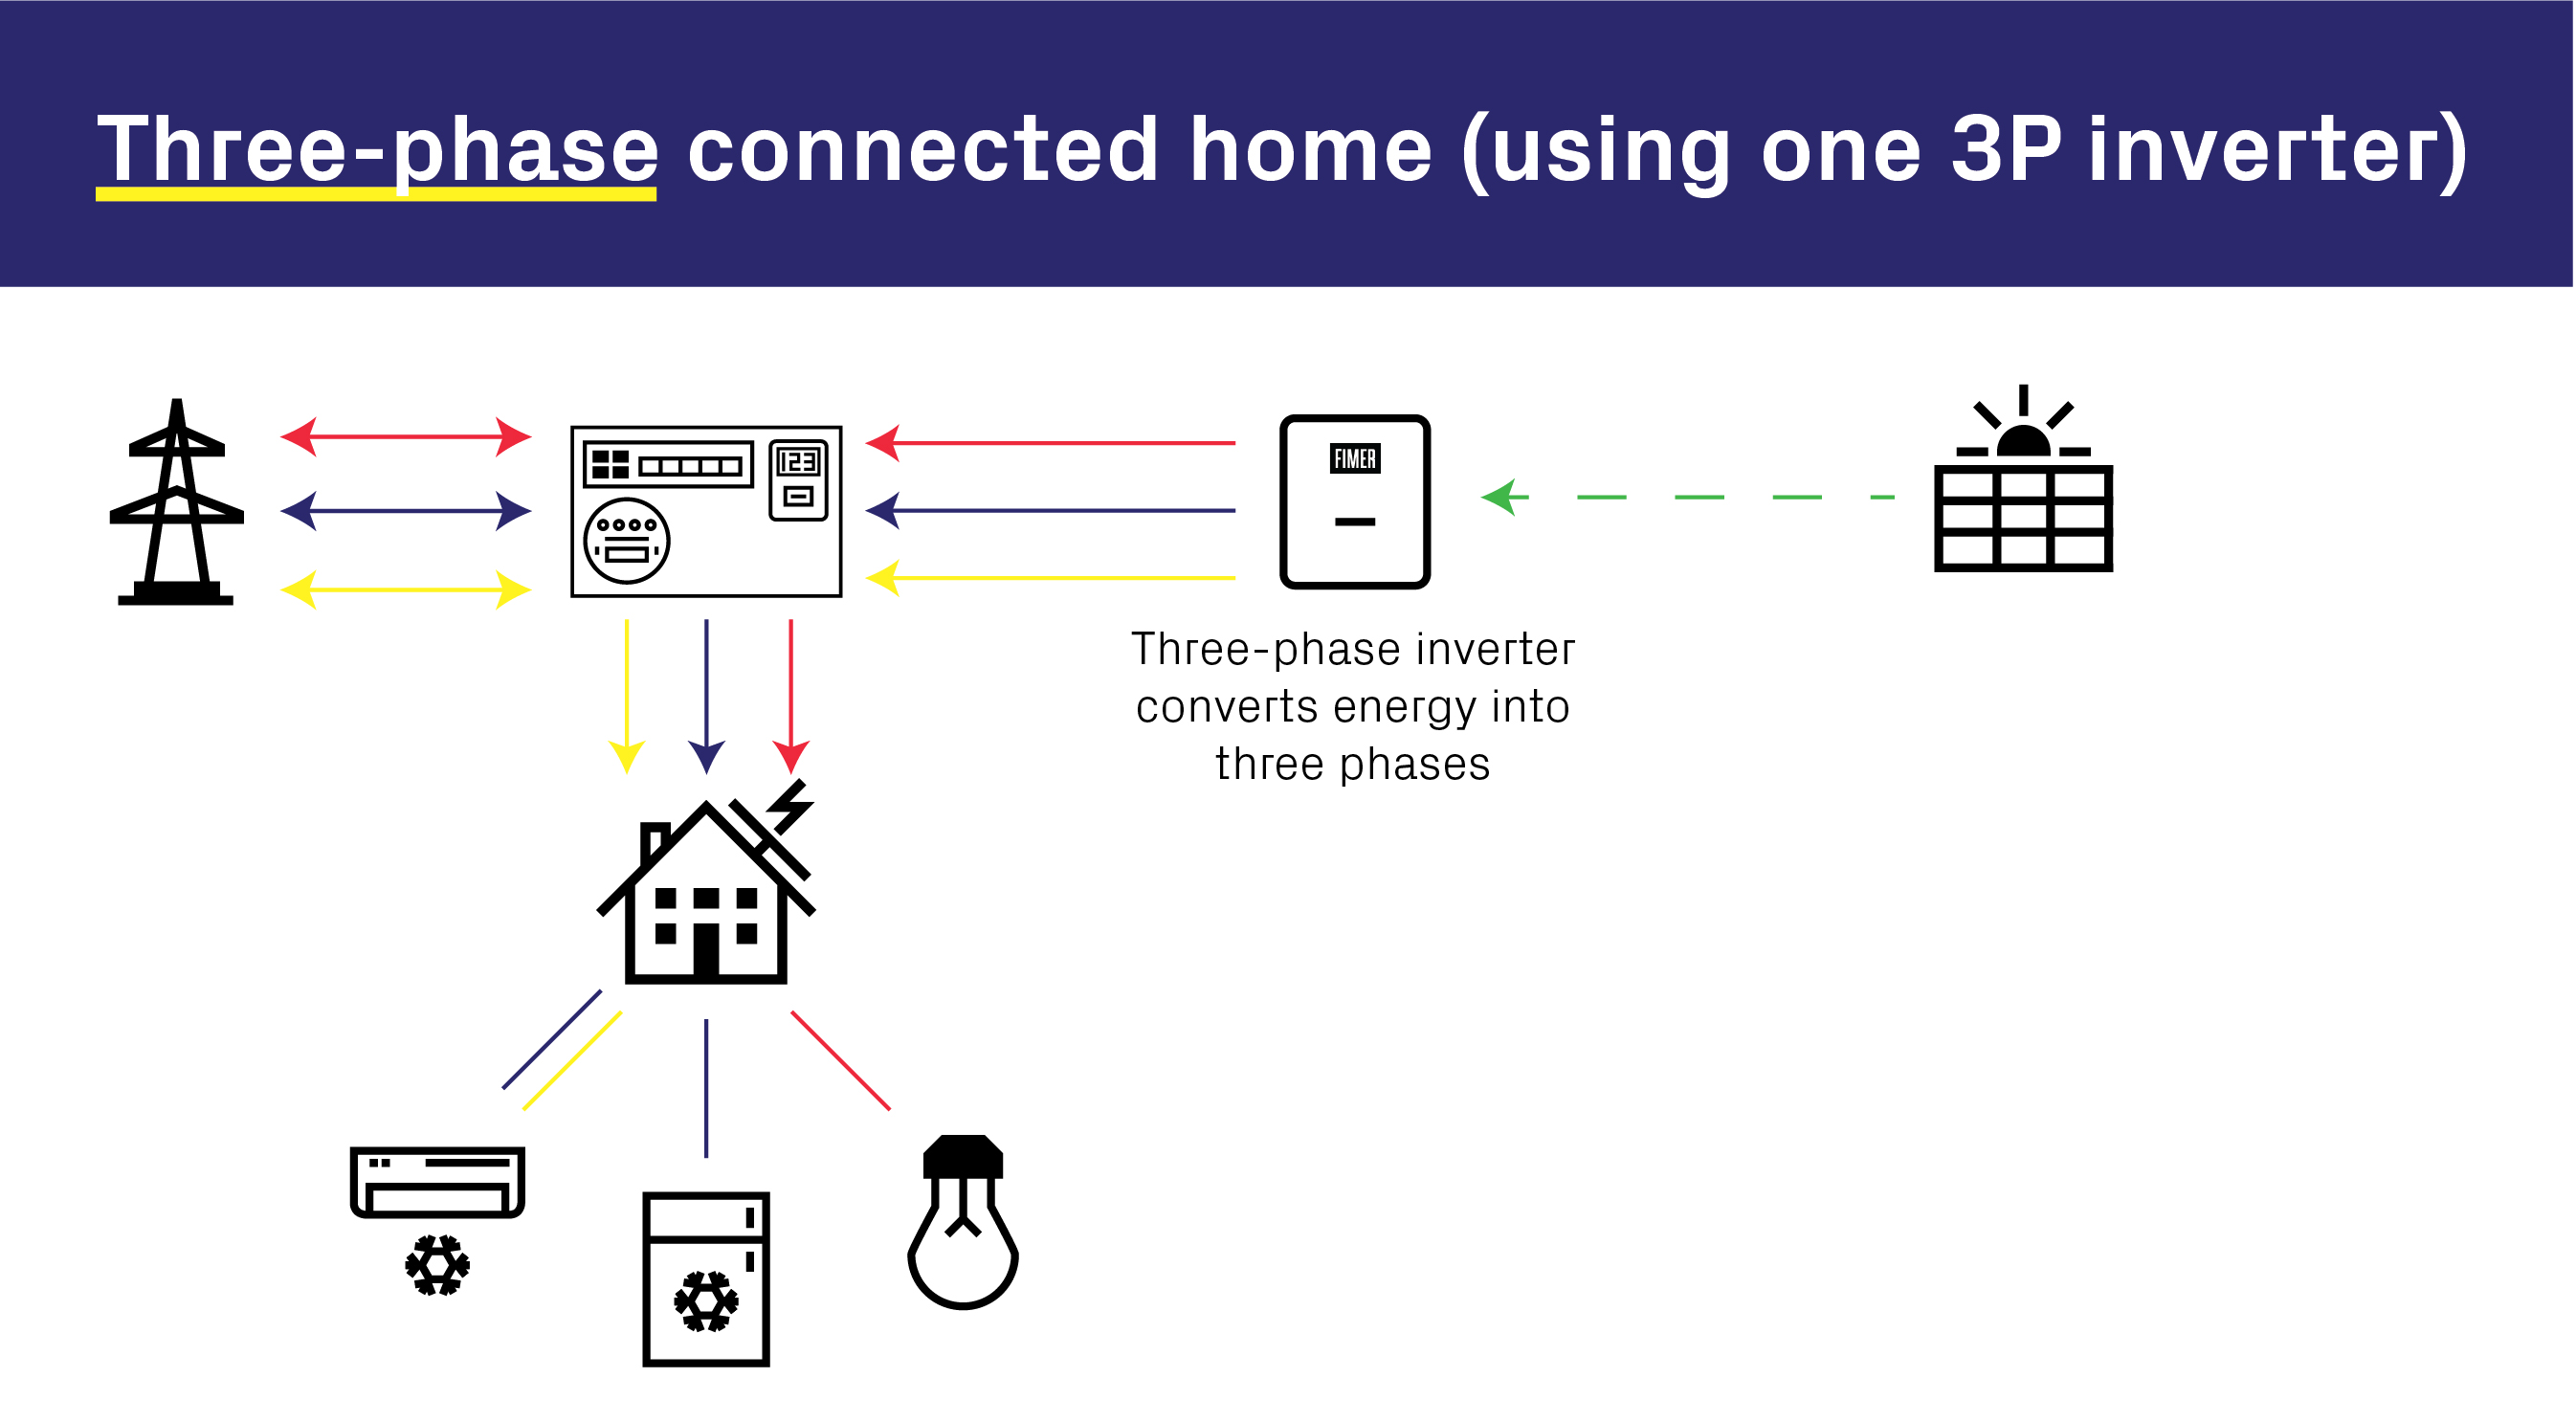 Three-Phase Connected Home - 1 Solar Inverter